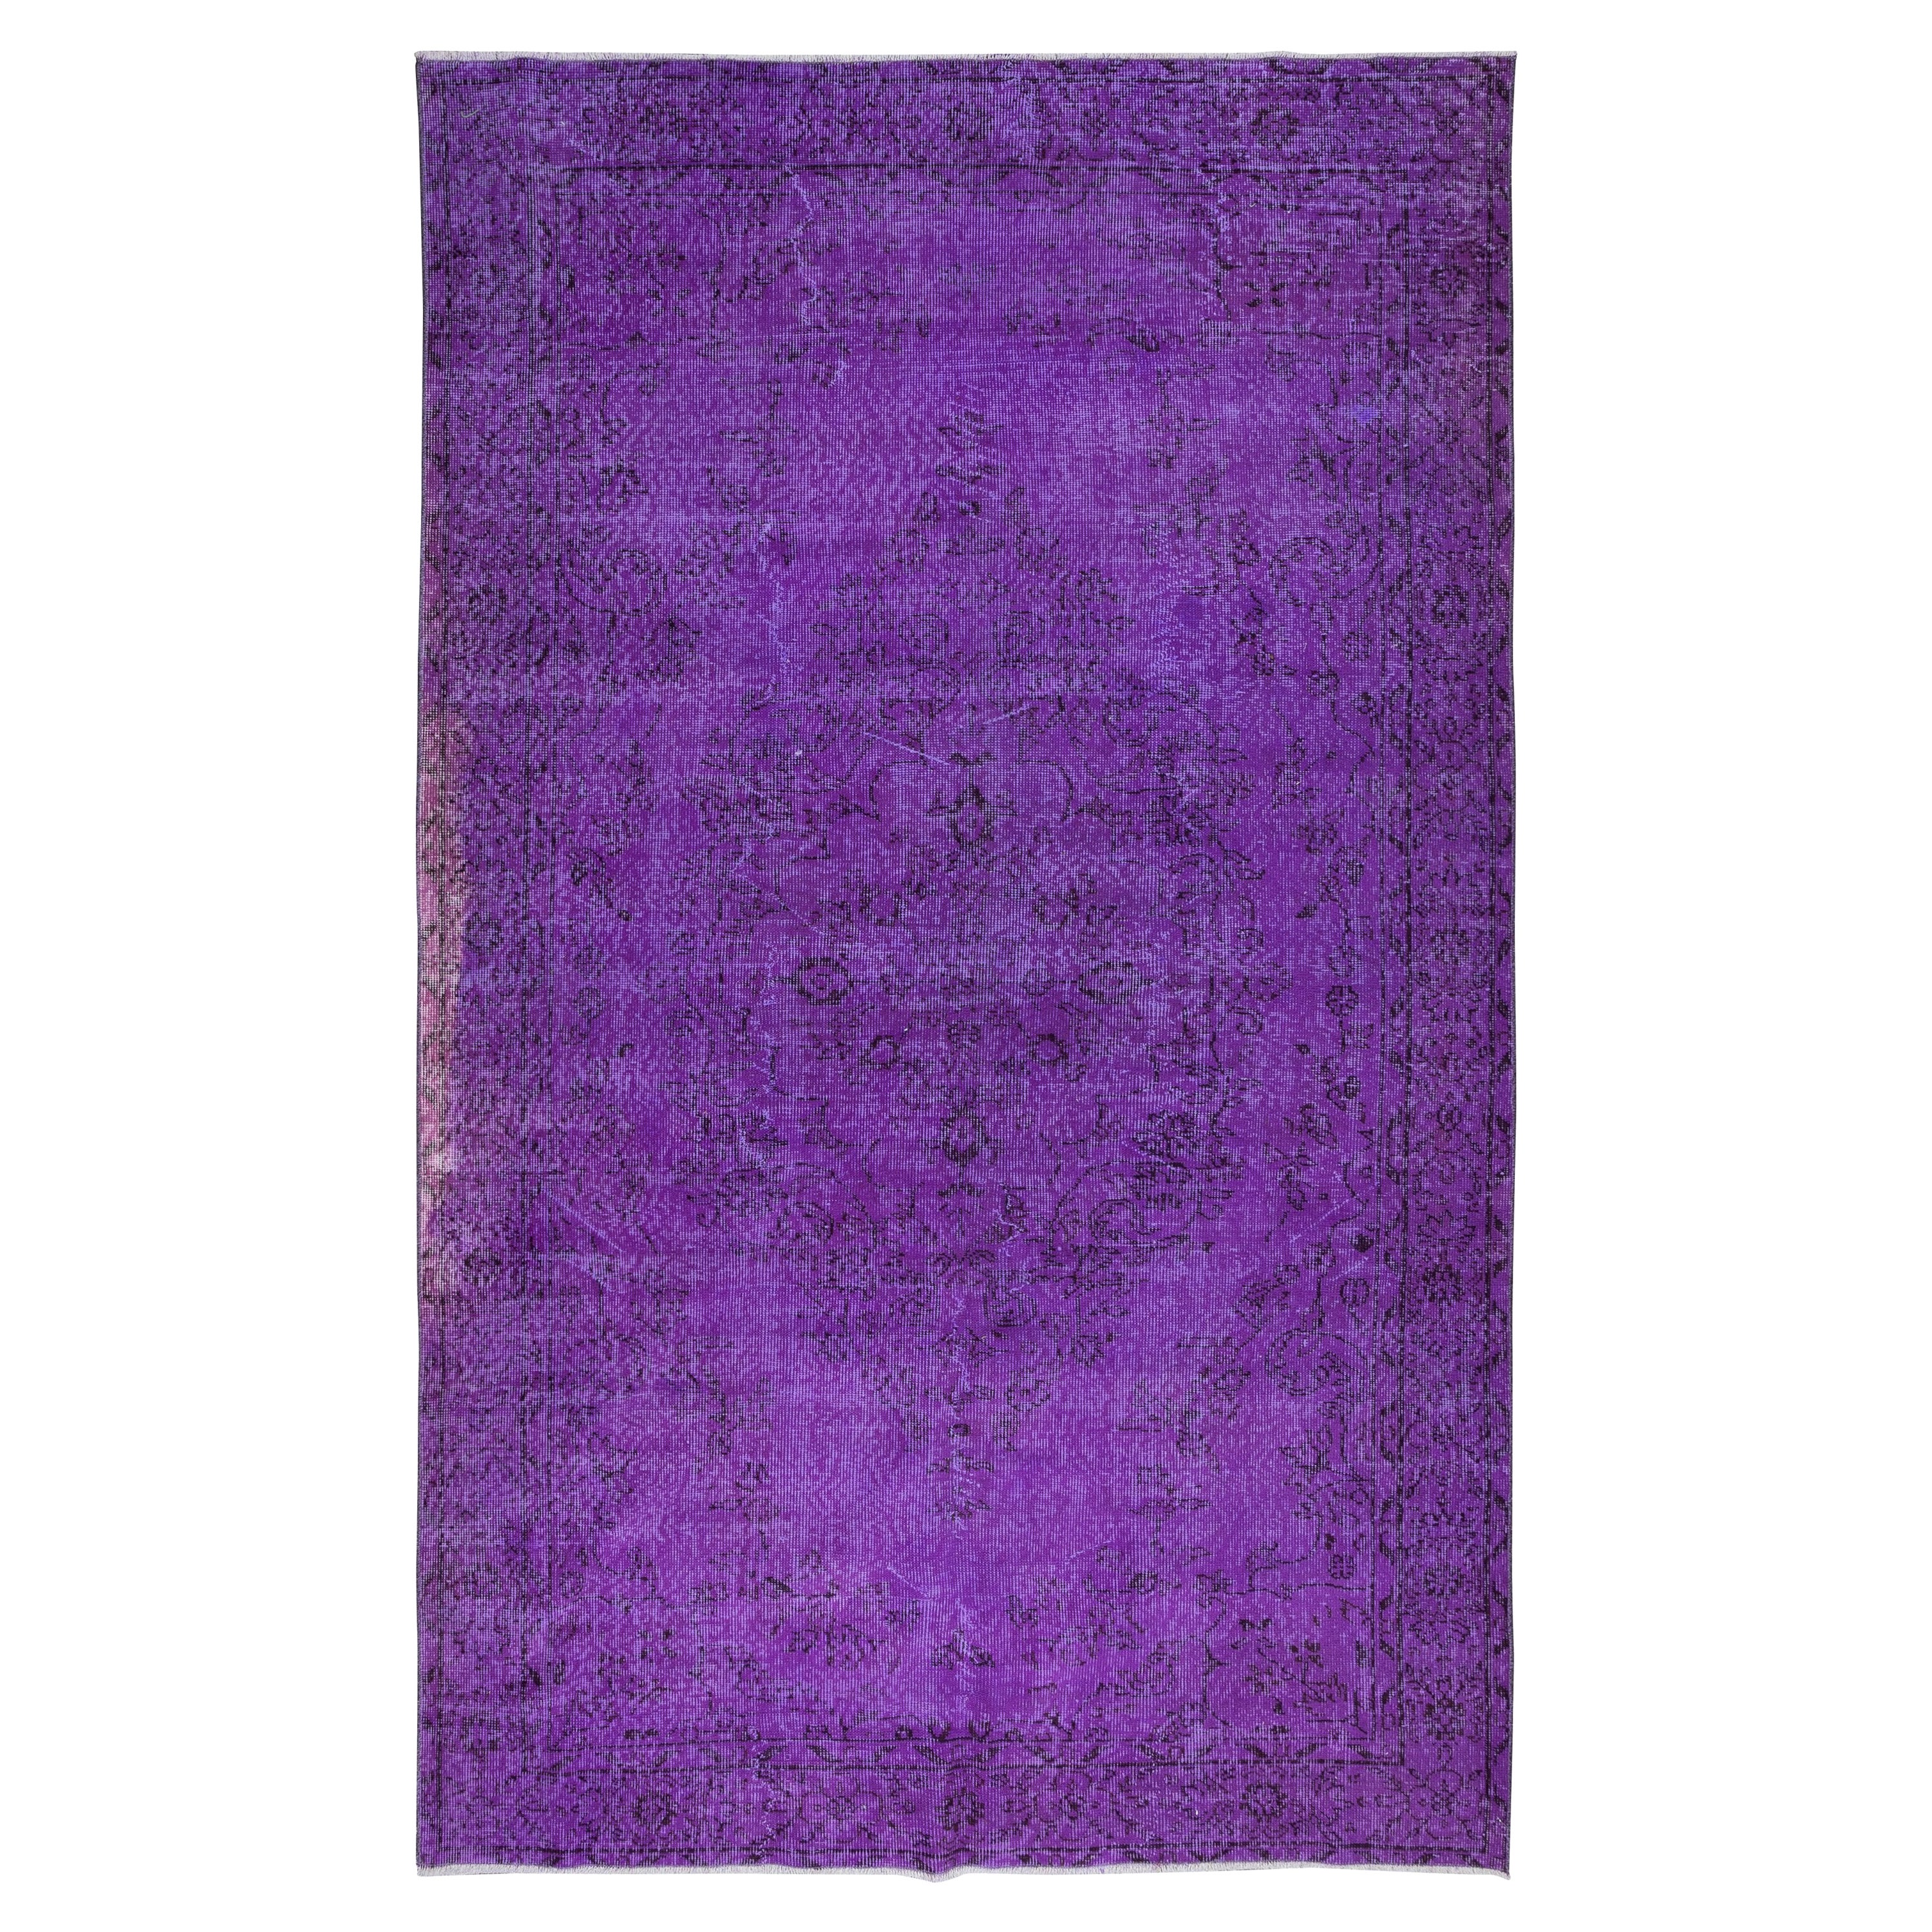 5.8x9.6 Ft Decorative Purple Area Rug for Modern Interior, Handknotted in Turkey